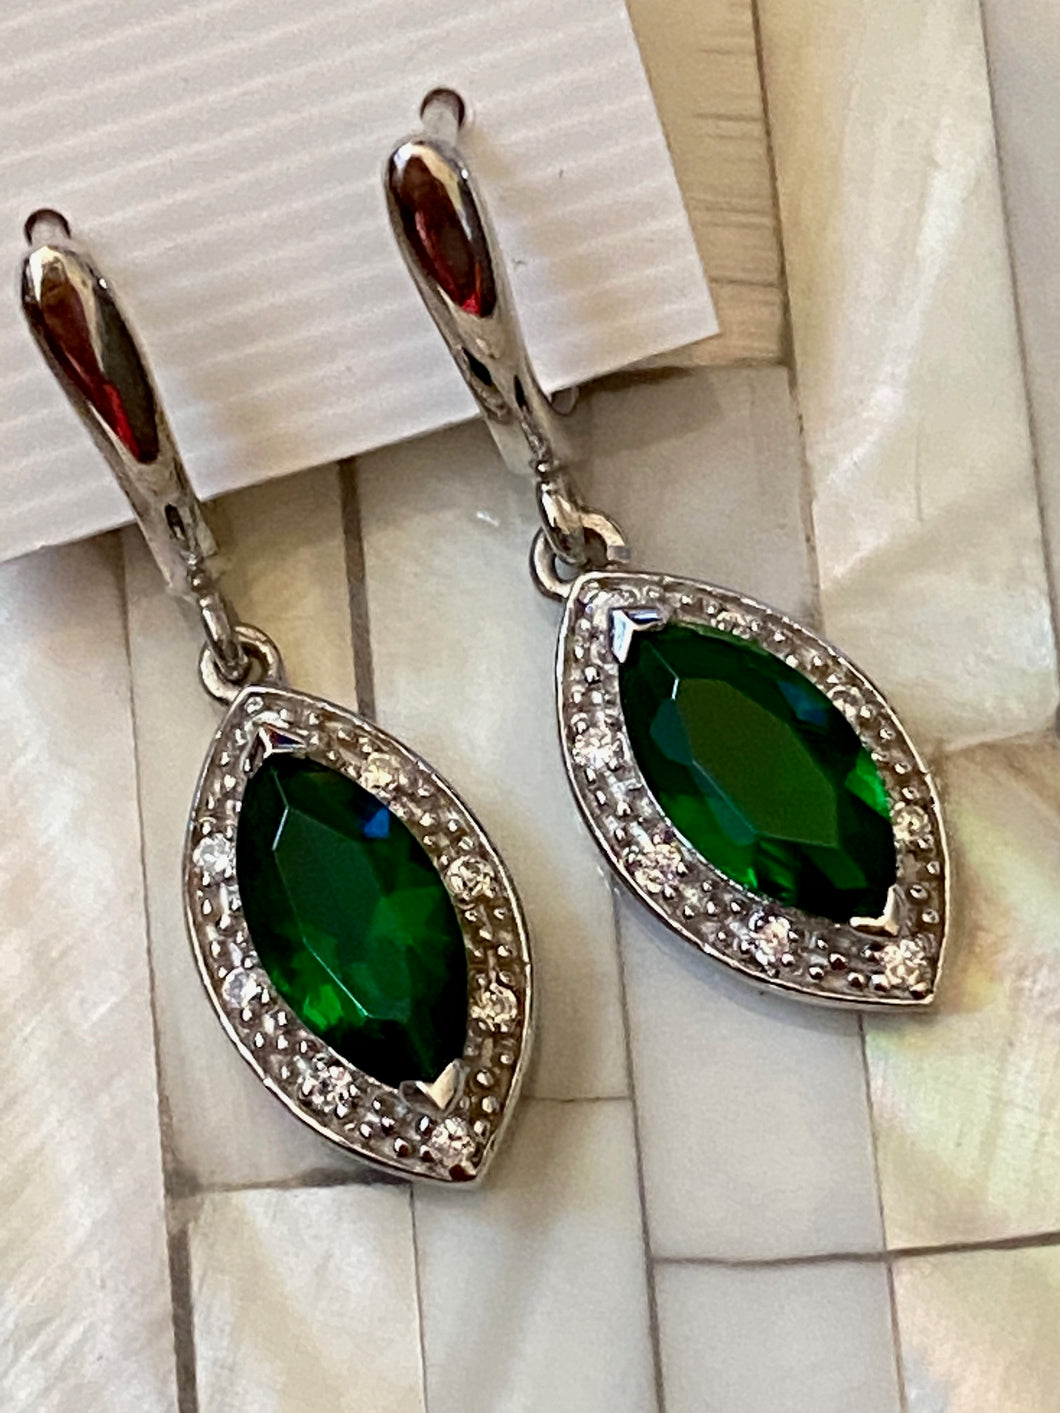 Handcrafted Earrings Gemstones Emerald & White Topaz. Sterling Silver.Free Shipping